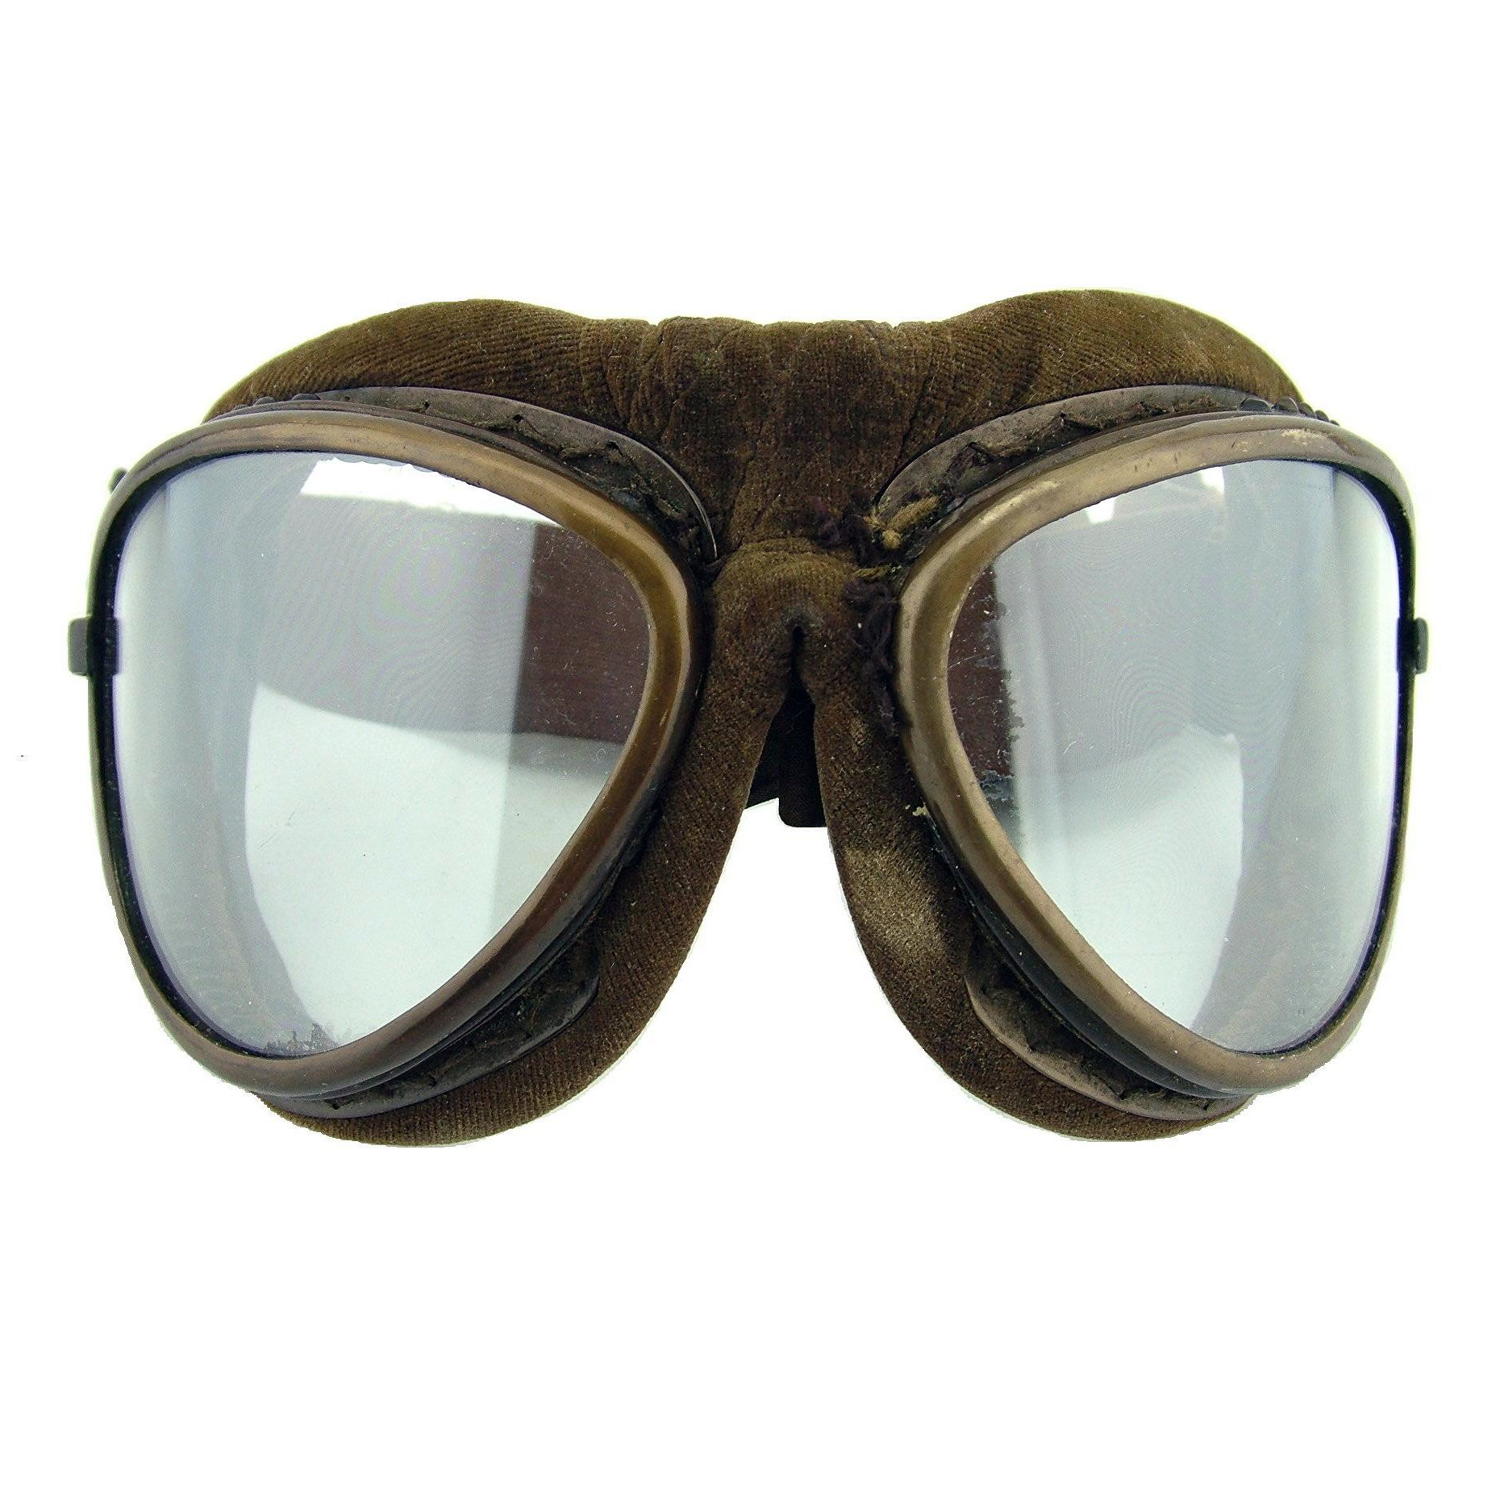 Imperial Japanese army flying goggles